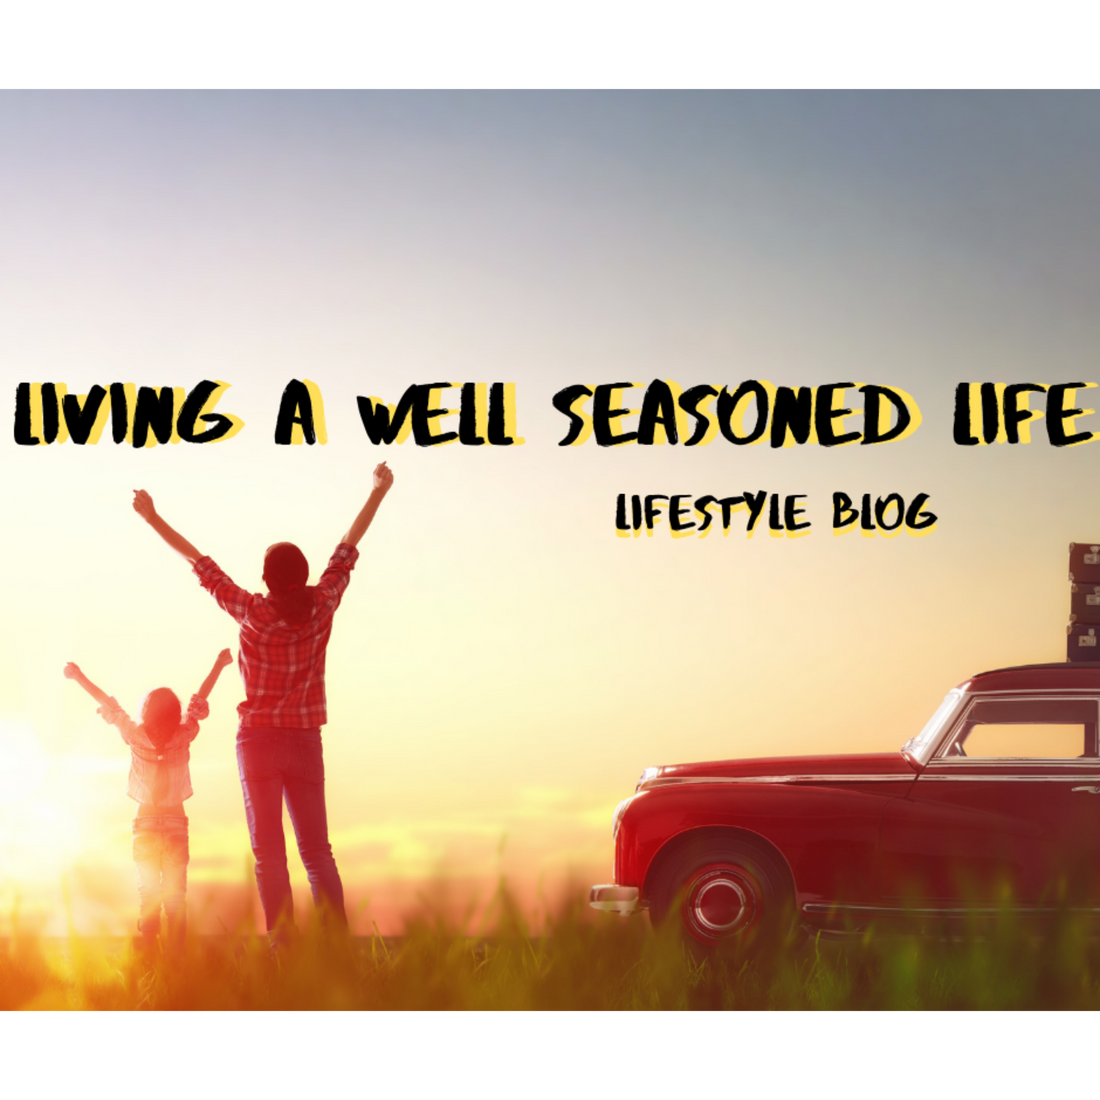 Introduction to Living A Well Seasoned Life